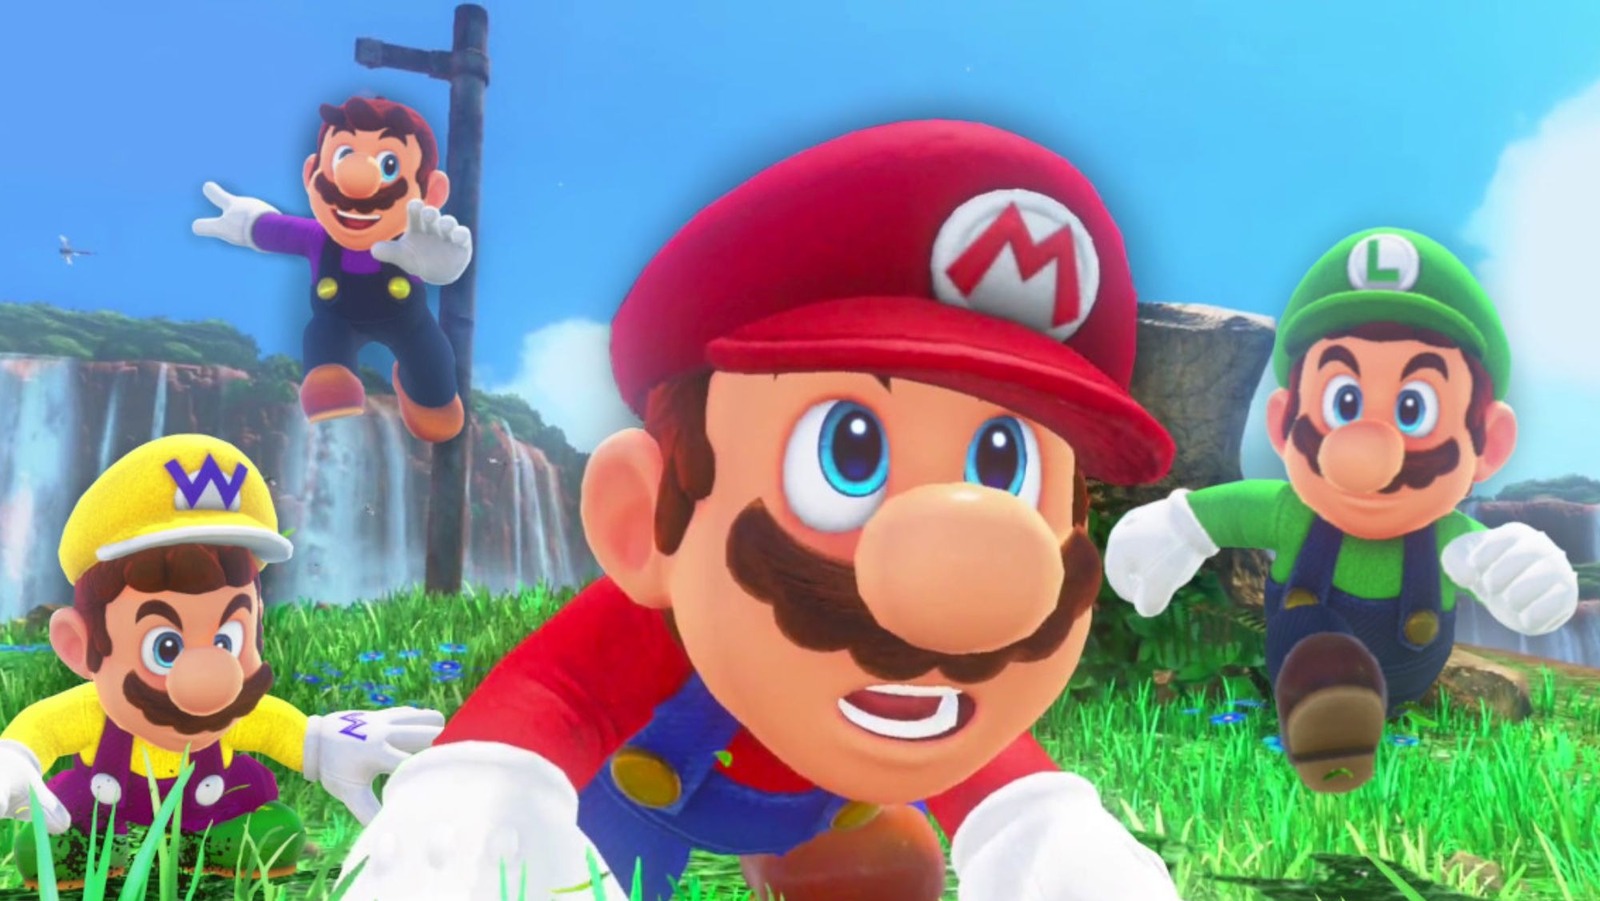 #Nintendo Is Doubling Down On Animated Films With Creation Of Nintendo Pictures Co.